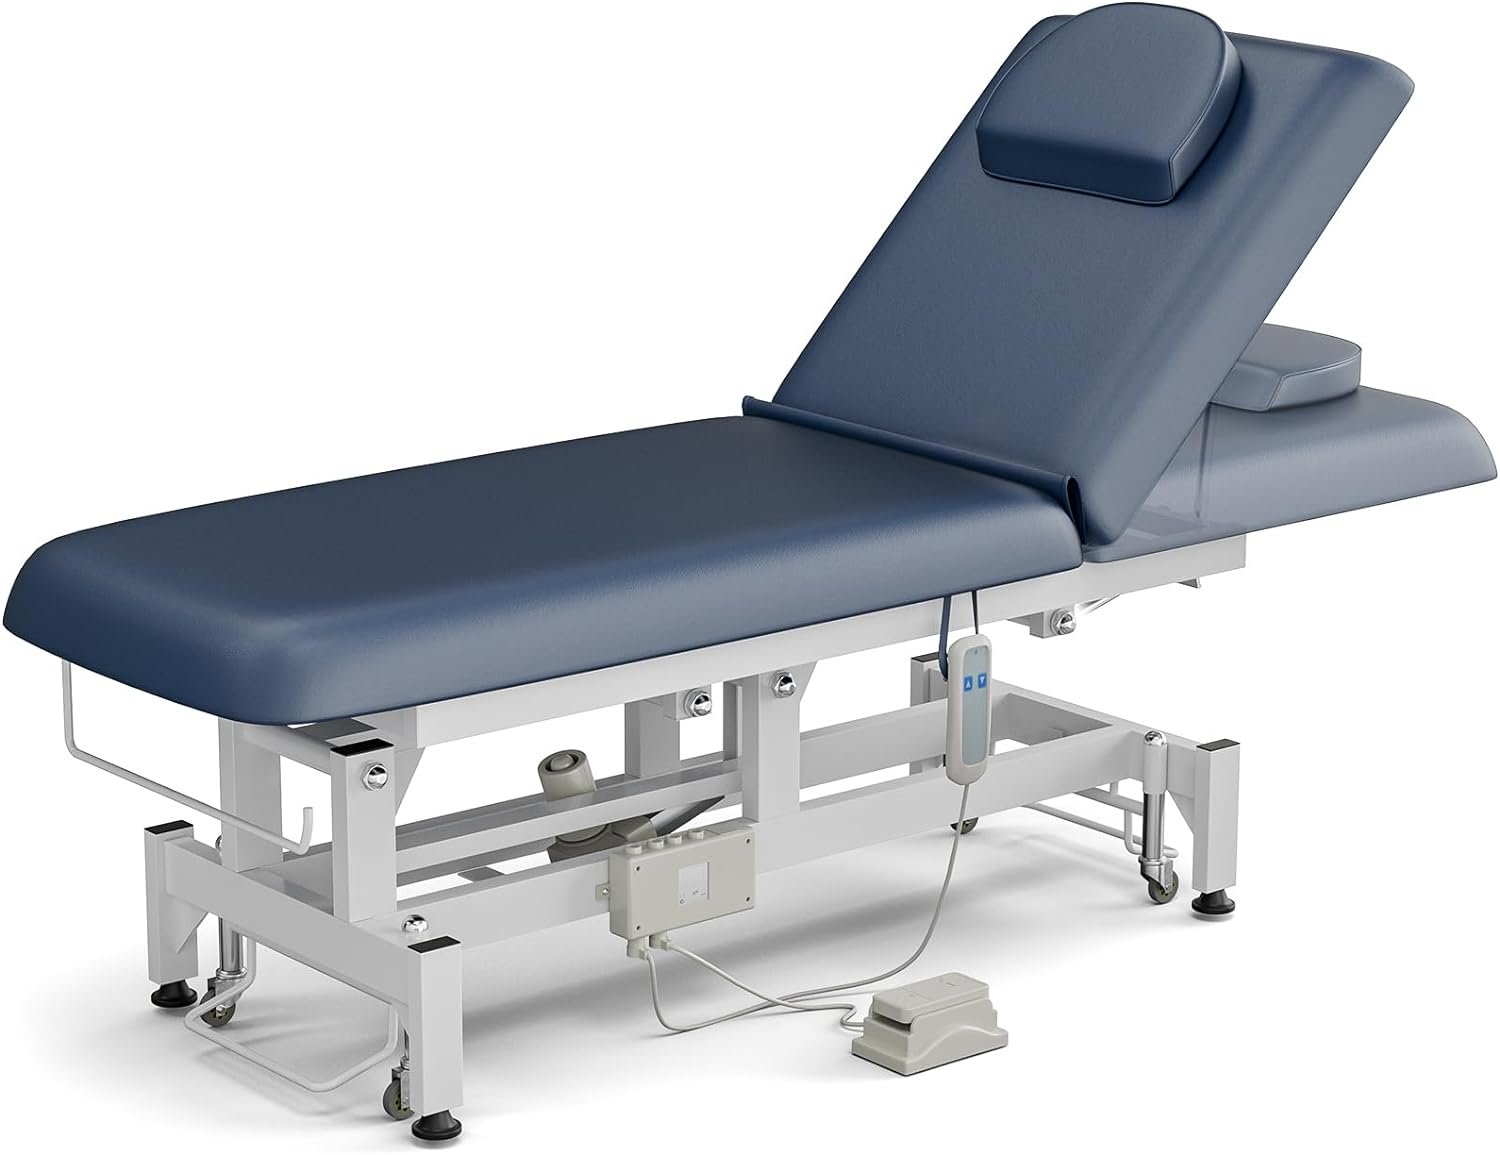 Icoget Electric Lift Massage Table Bed, Spa Facial Treatment Table w/Face Hole, Adjustable Backrest Medical Table Beauty Beds for Esthetician, Salon Spa Bed for Wax, Lash Extension, Blue